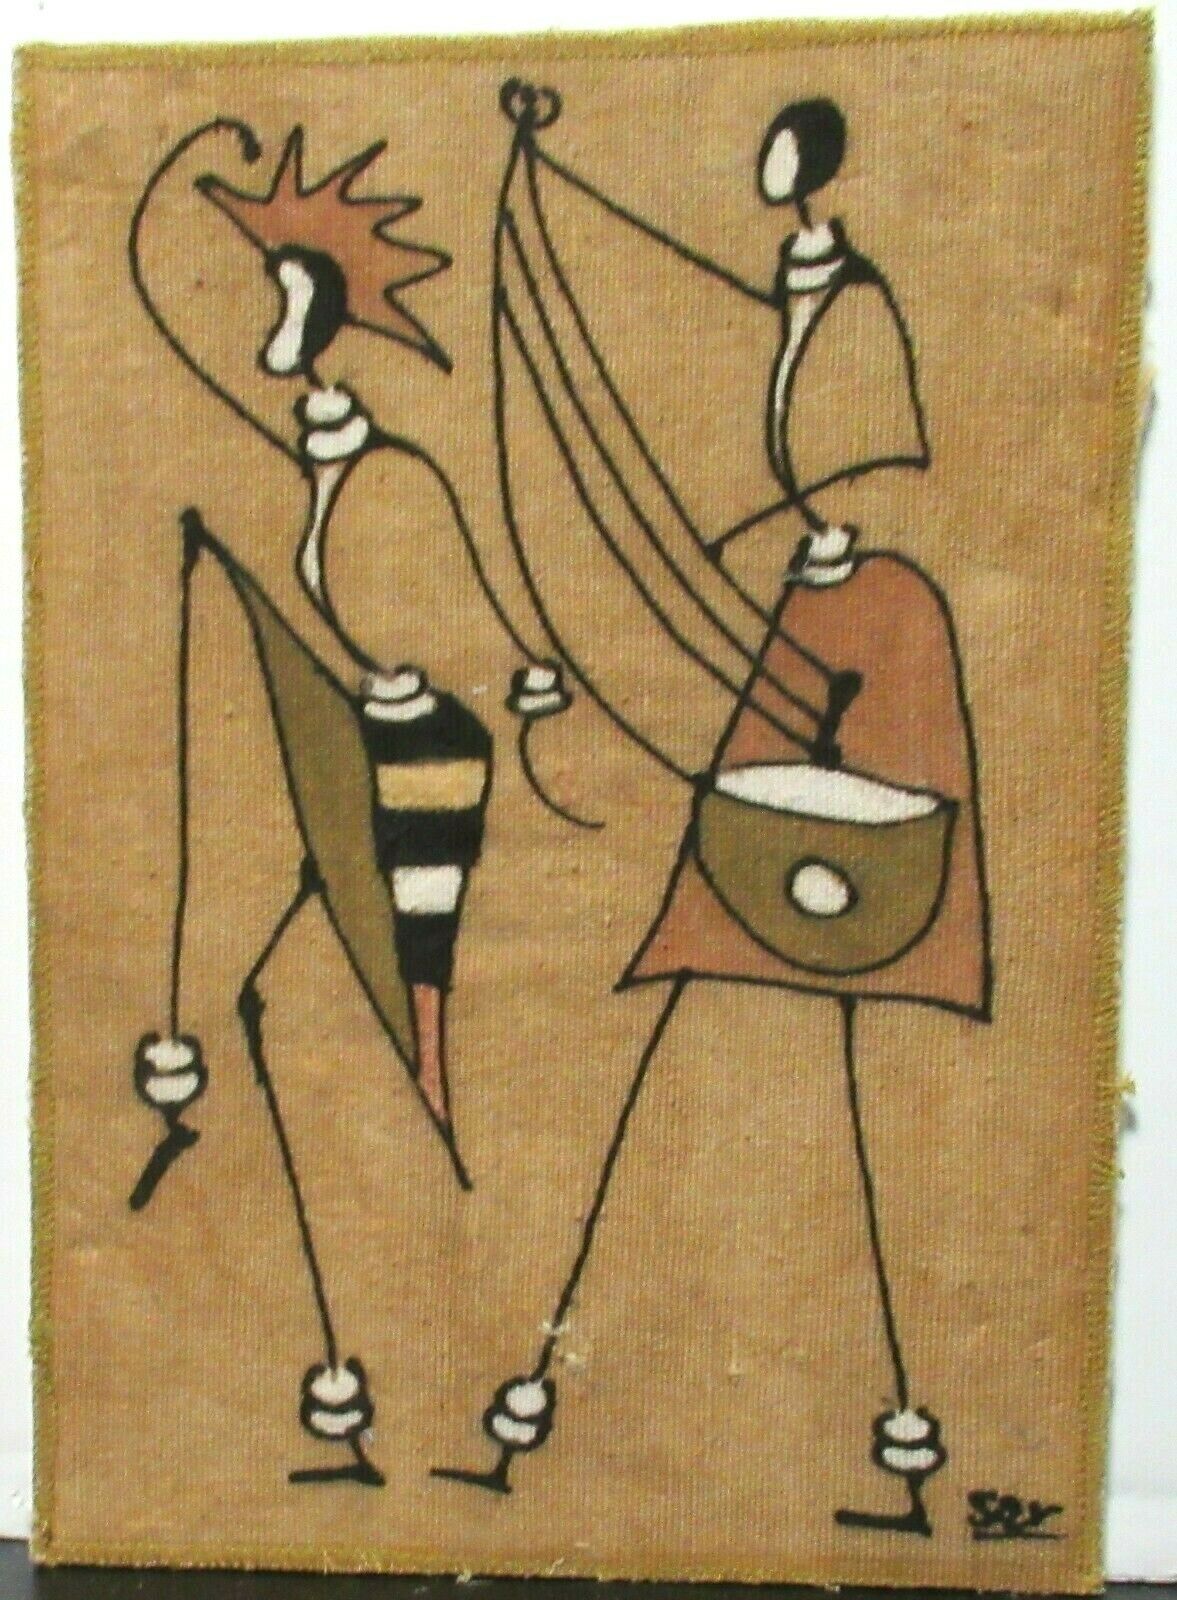 Say African Two Women Acrylic On Cloth Tapestry Painting Unframed